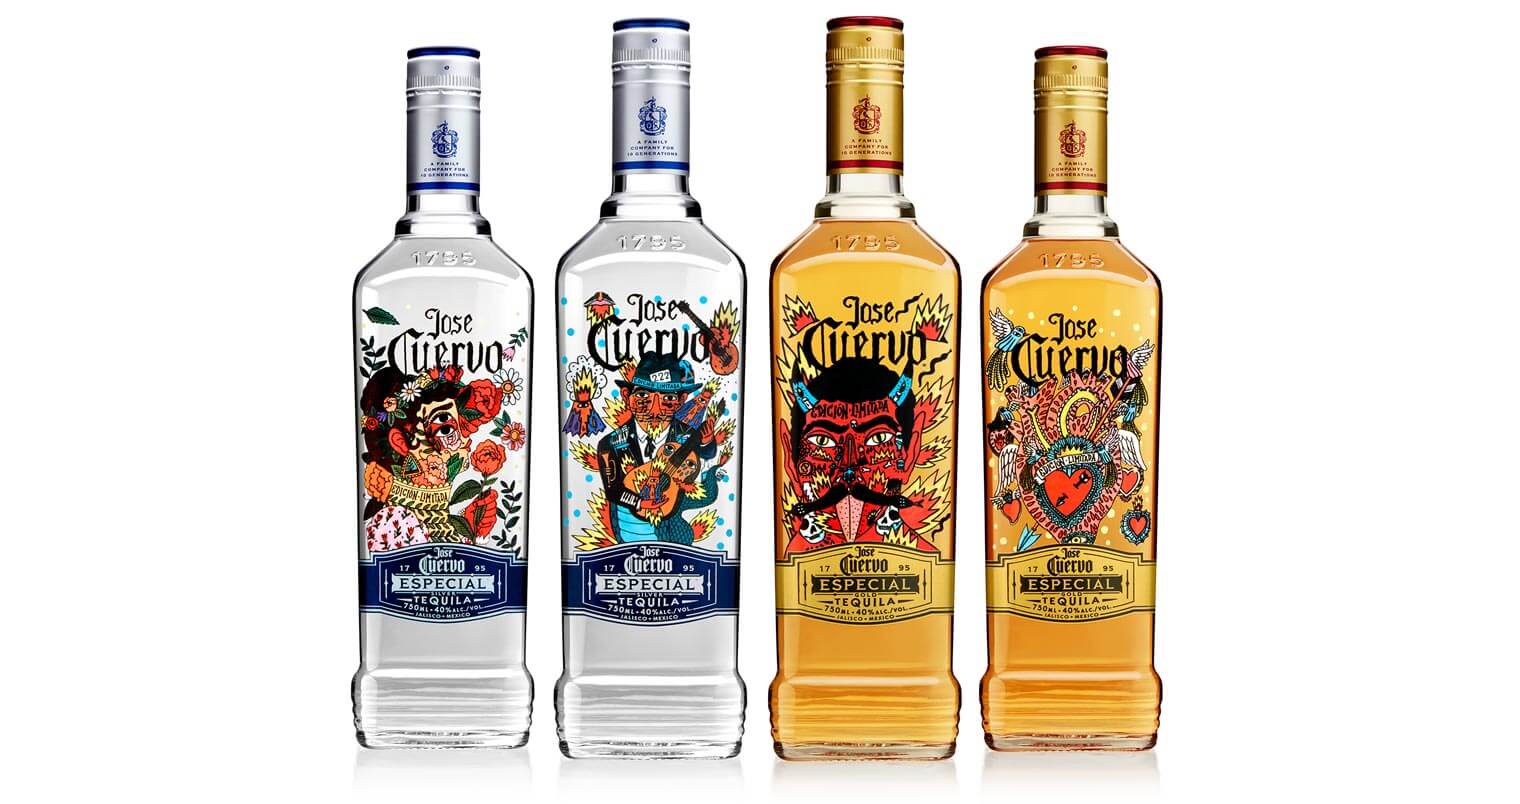 Jose Cuervo Celebrates 222 Years with Limited Edtion Bottle Series, featured image